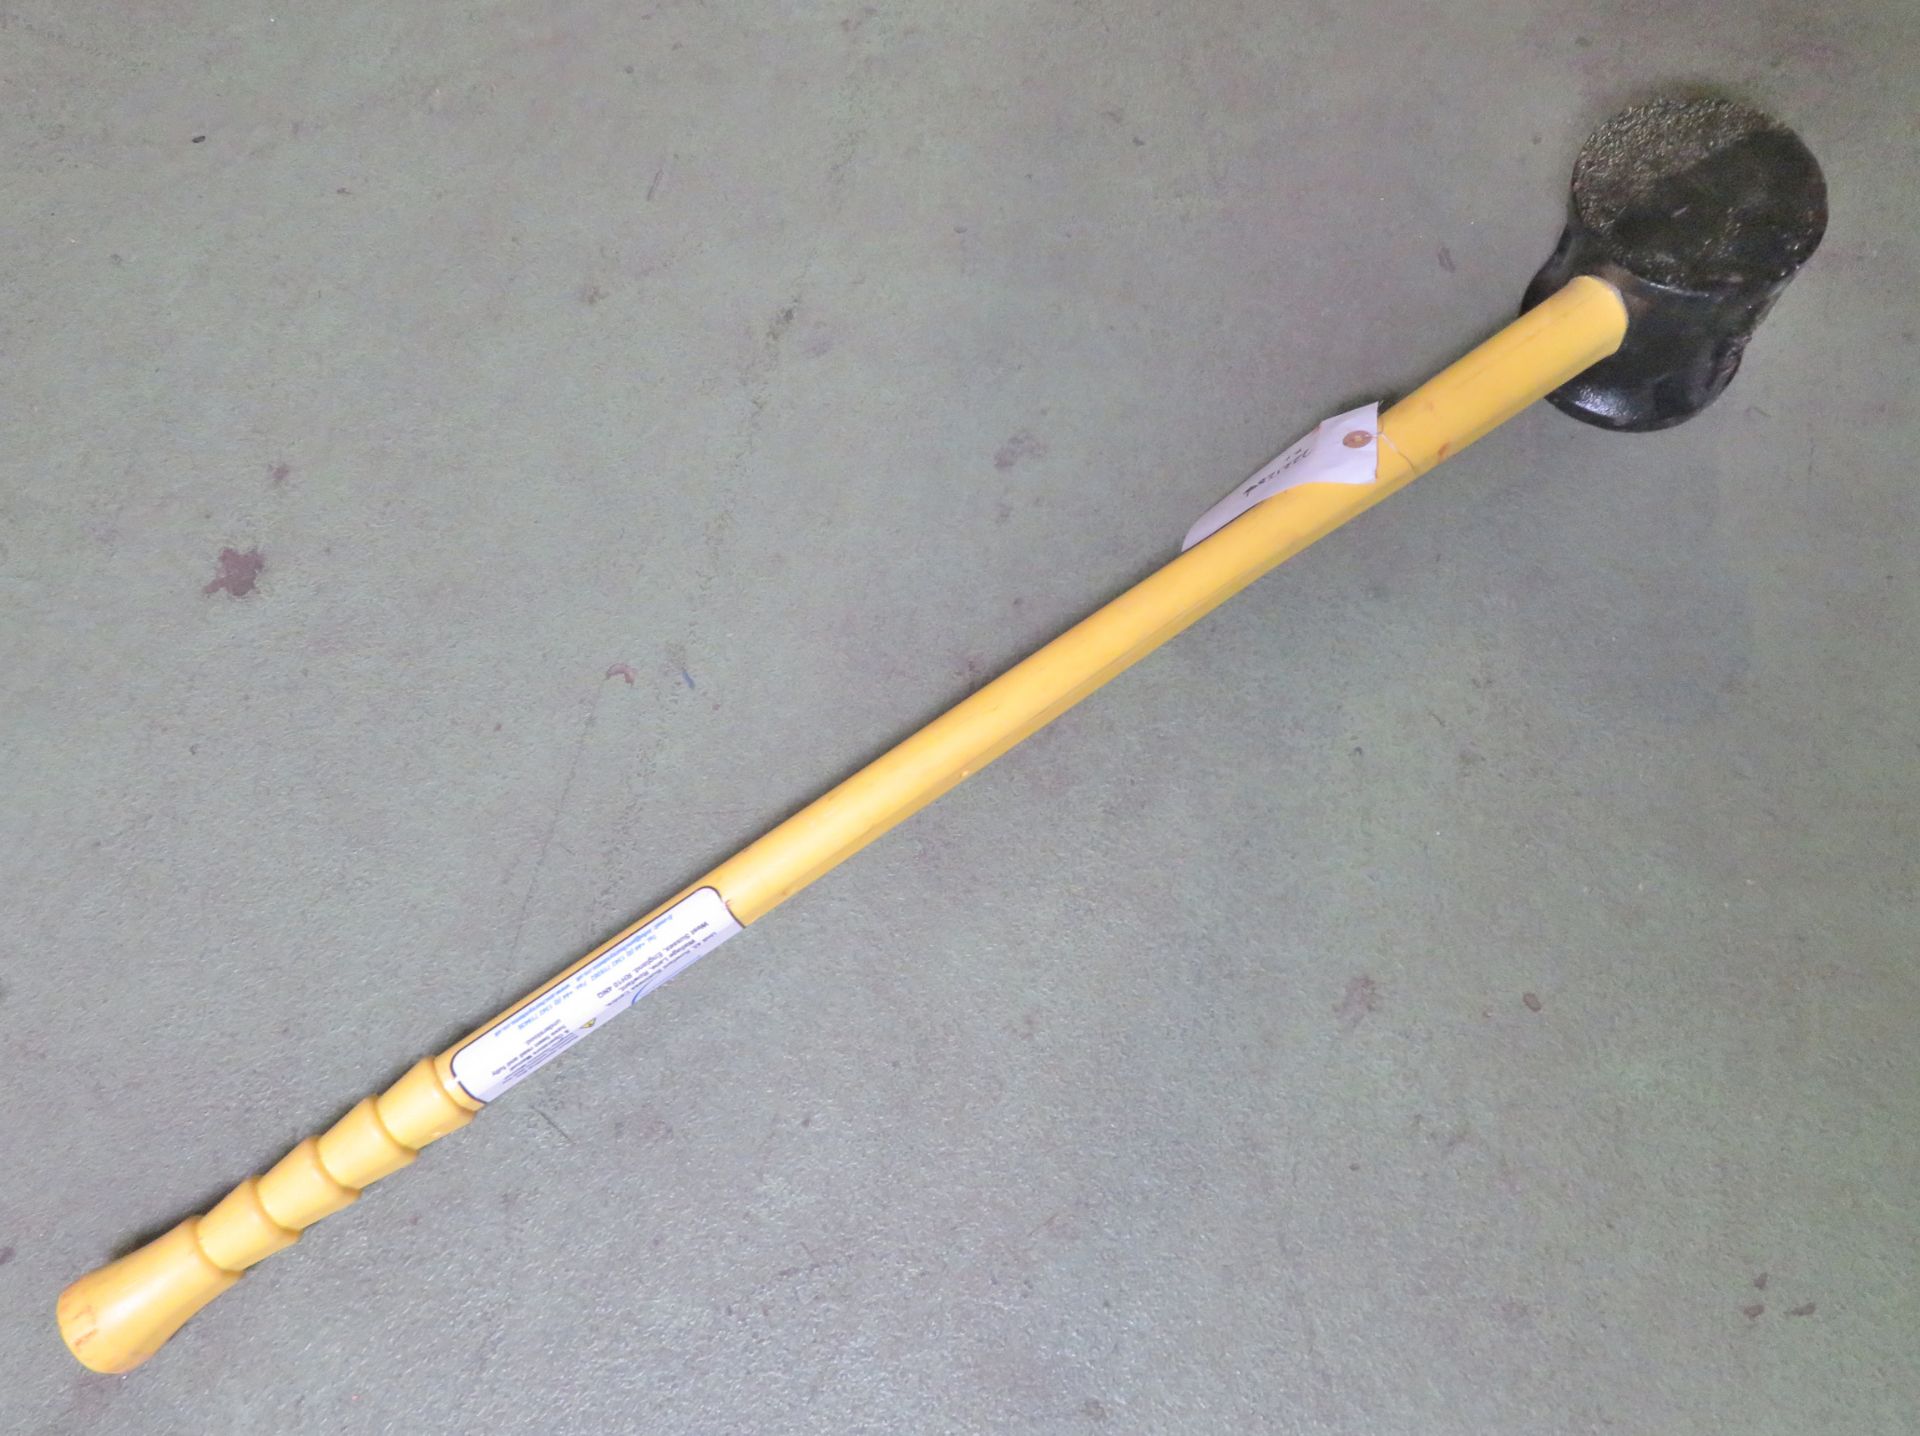 Jafco Tool heavy duty metal head mallet with plastic handle - Image 2 of 2